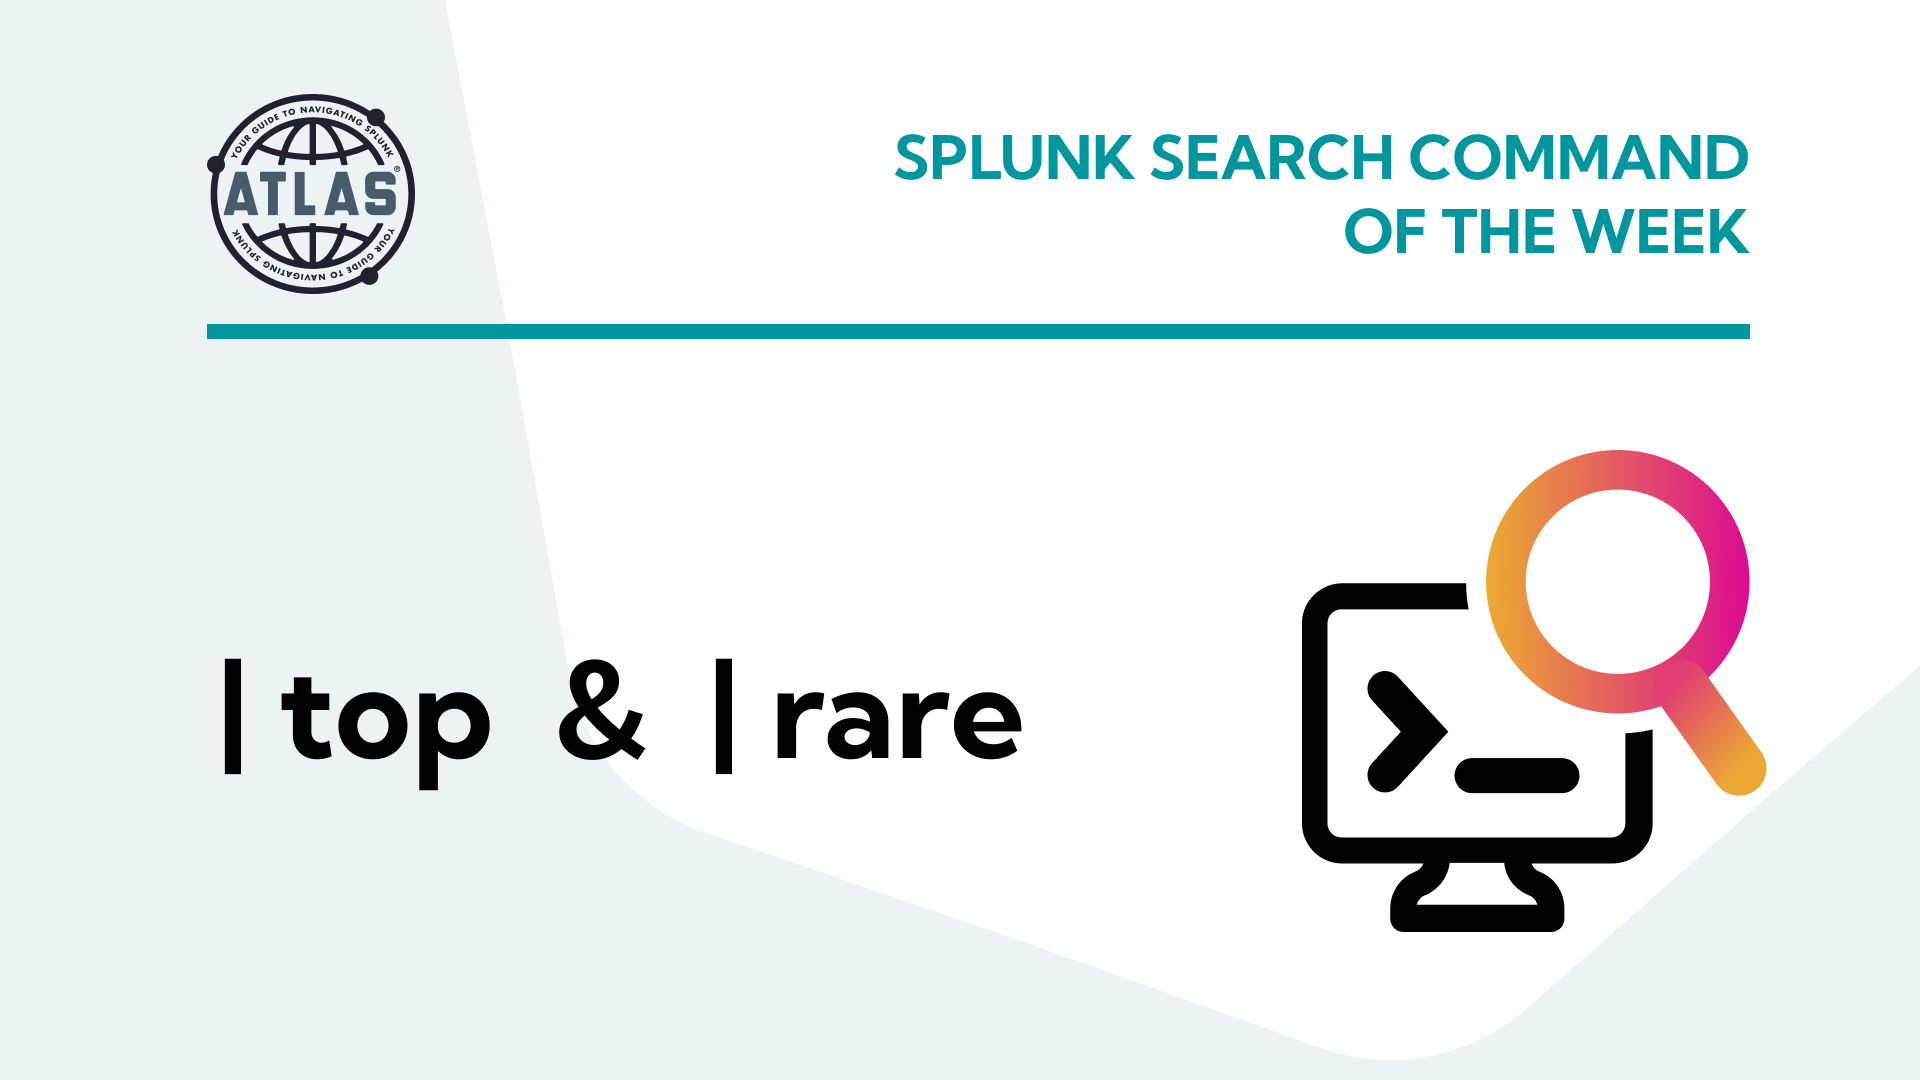 Splunk Search Command Of The Week: top & rare